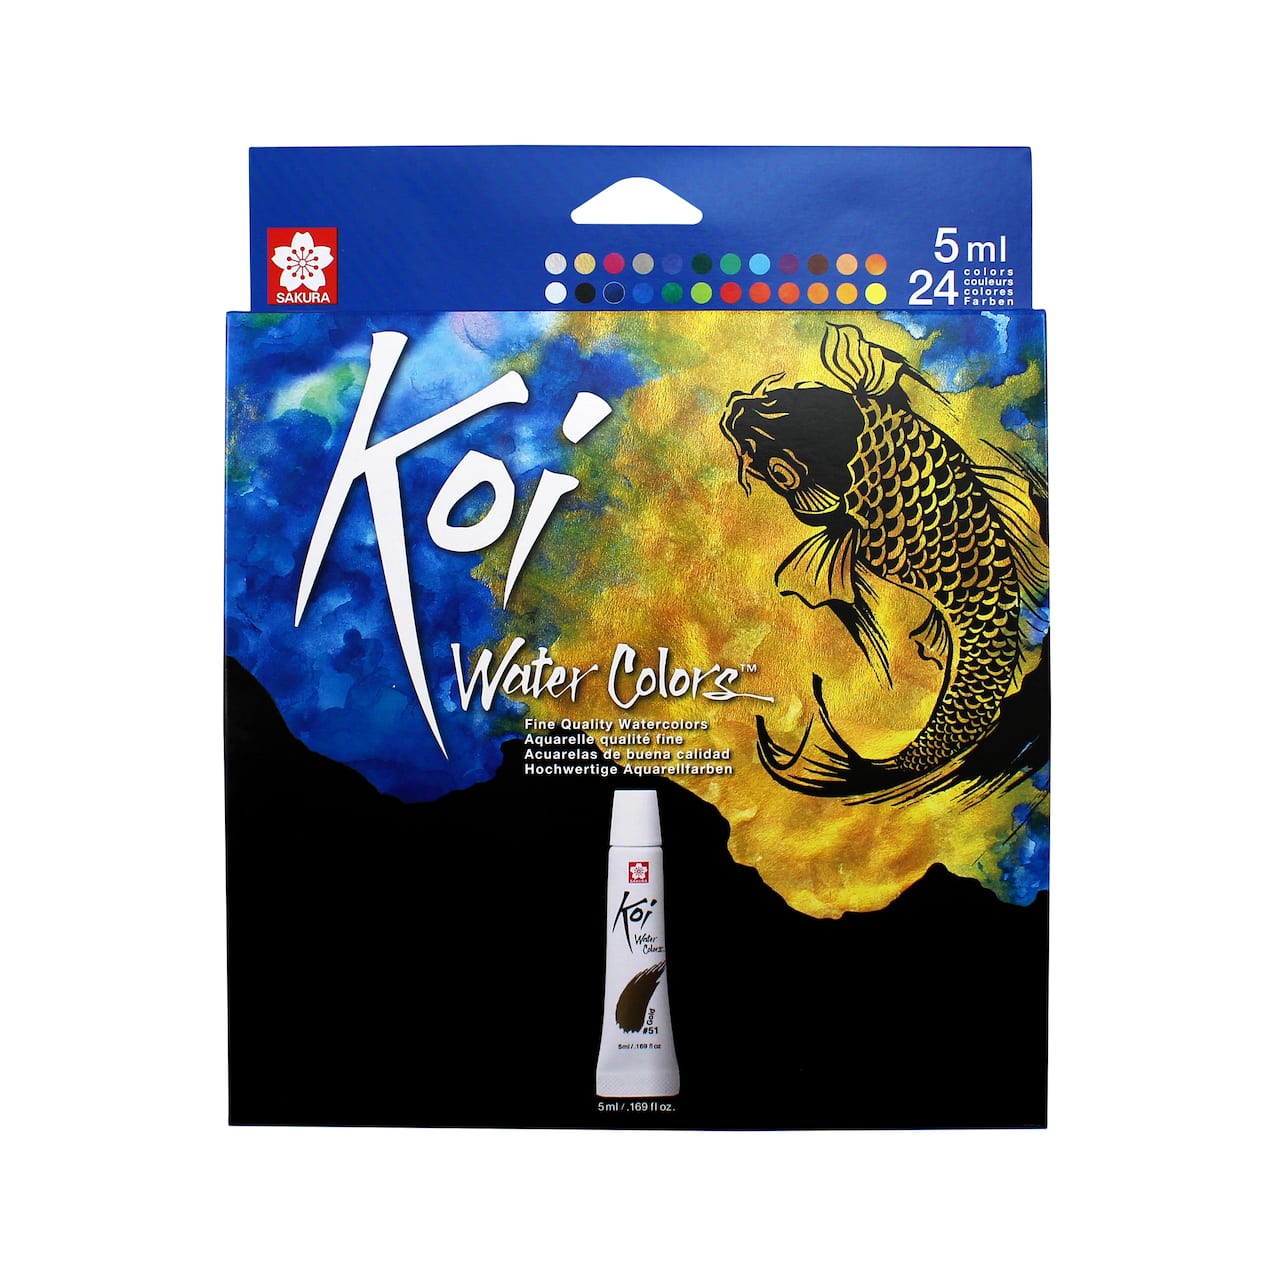 Koi Water Colors&#x2122; 24 Color Fine Quality Watercolors